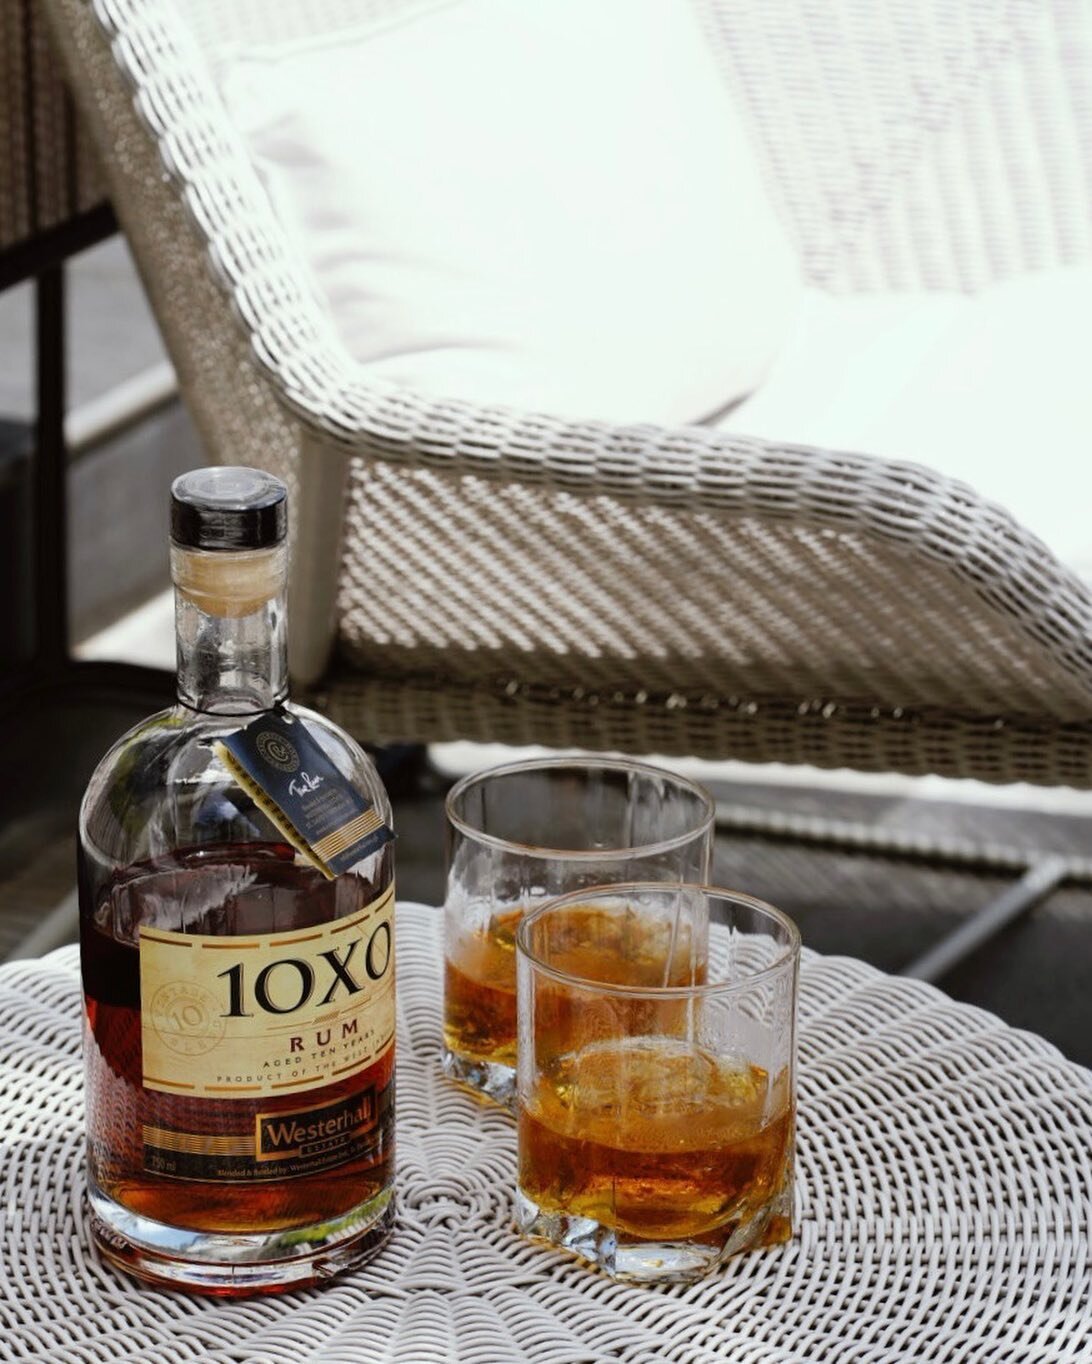 Savoring every sip of sophistication with 10XO Rum.

Cheers to elegance distilled to perfection. 

#WesterhallRums #10XO #SipInStyle 🥃✨